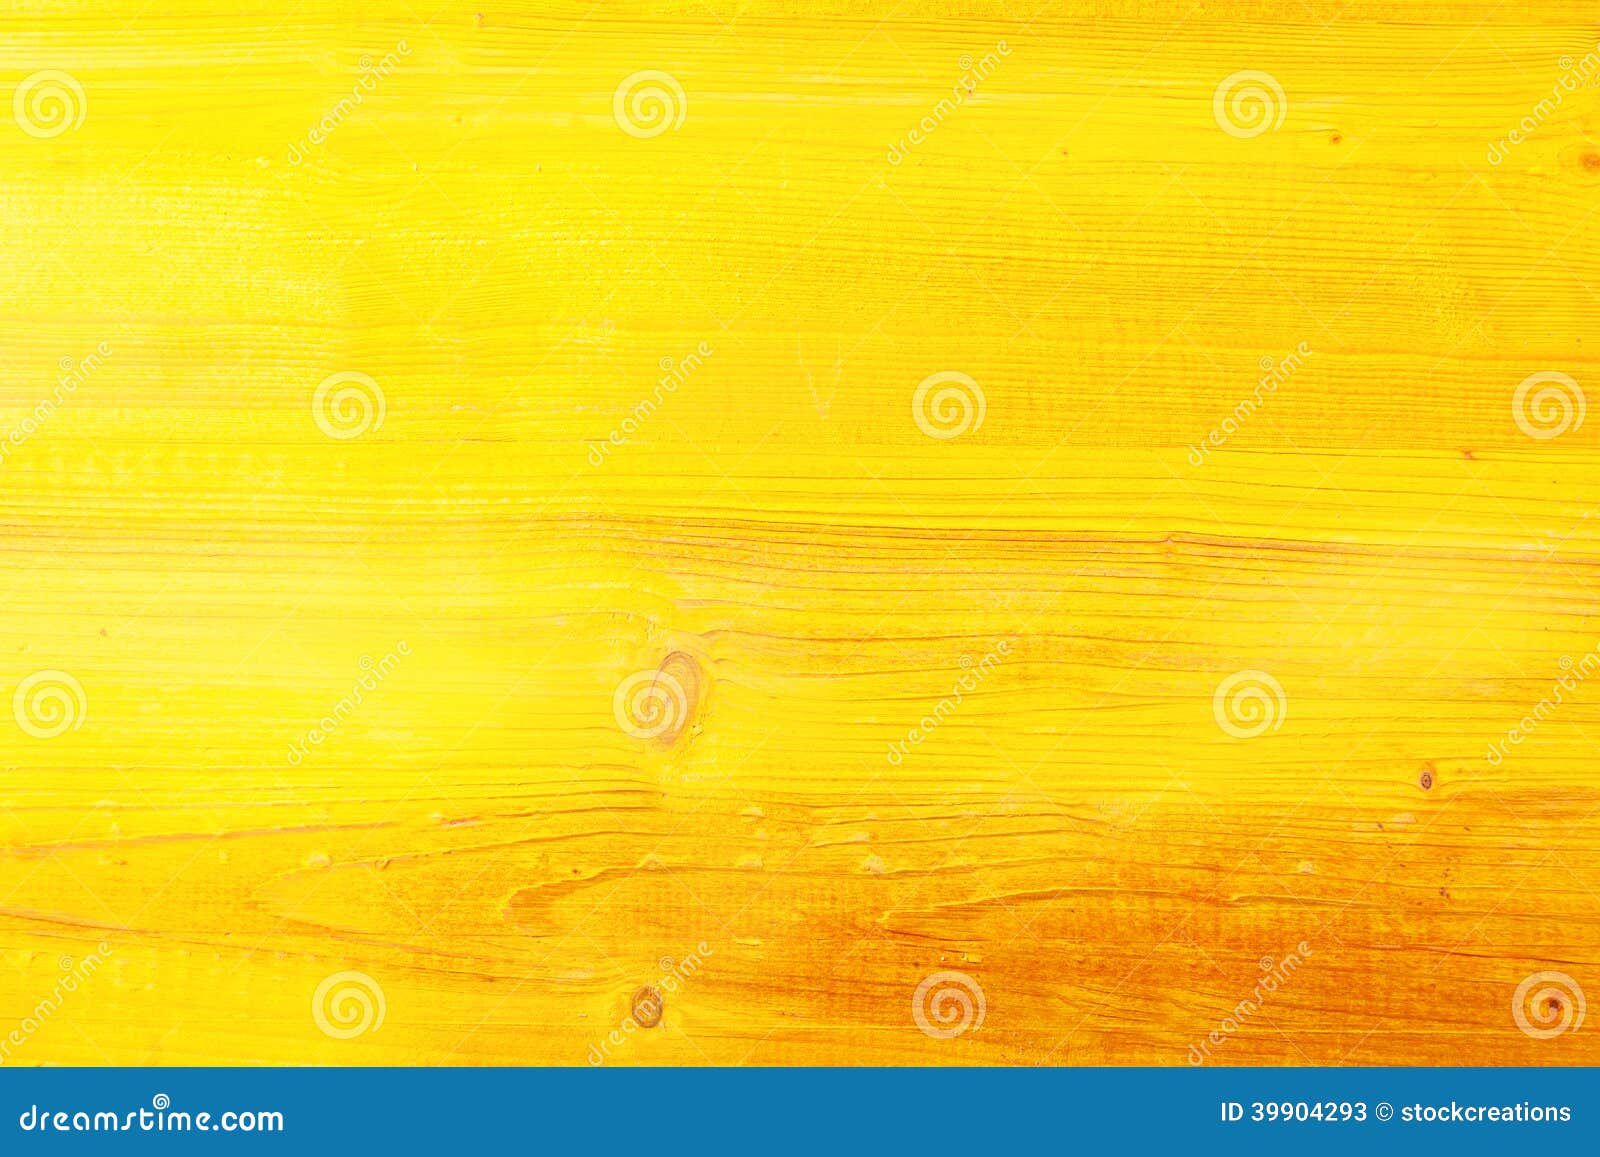 Architectural Wooden Background Stock Image - Image of frame, colorful ...